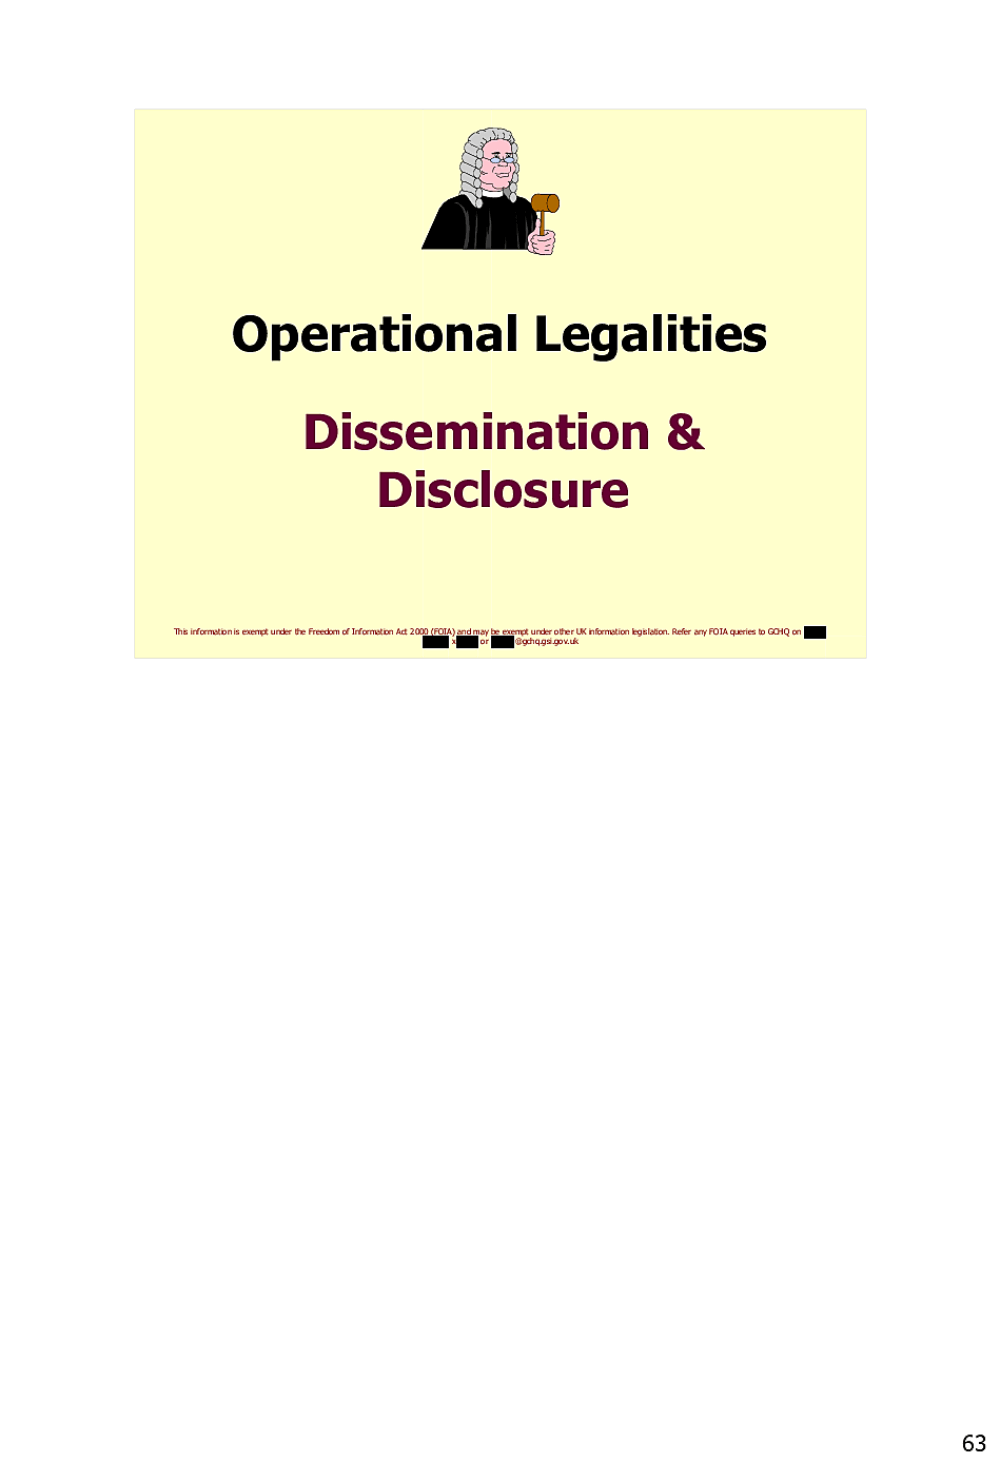 Page 140 from Operational Legalities – GCHQ Powerpoint Presentation